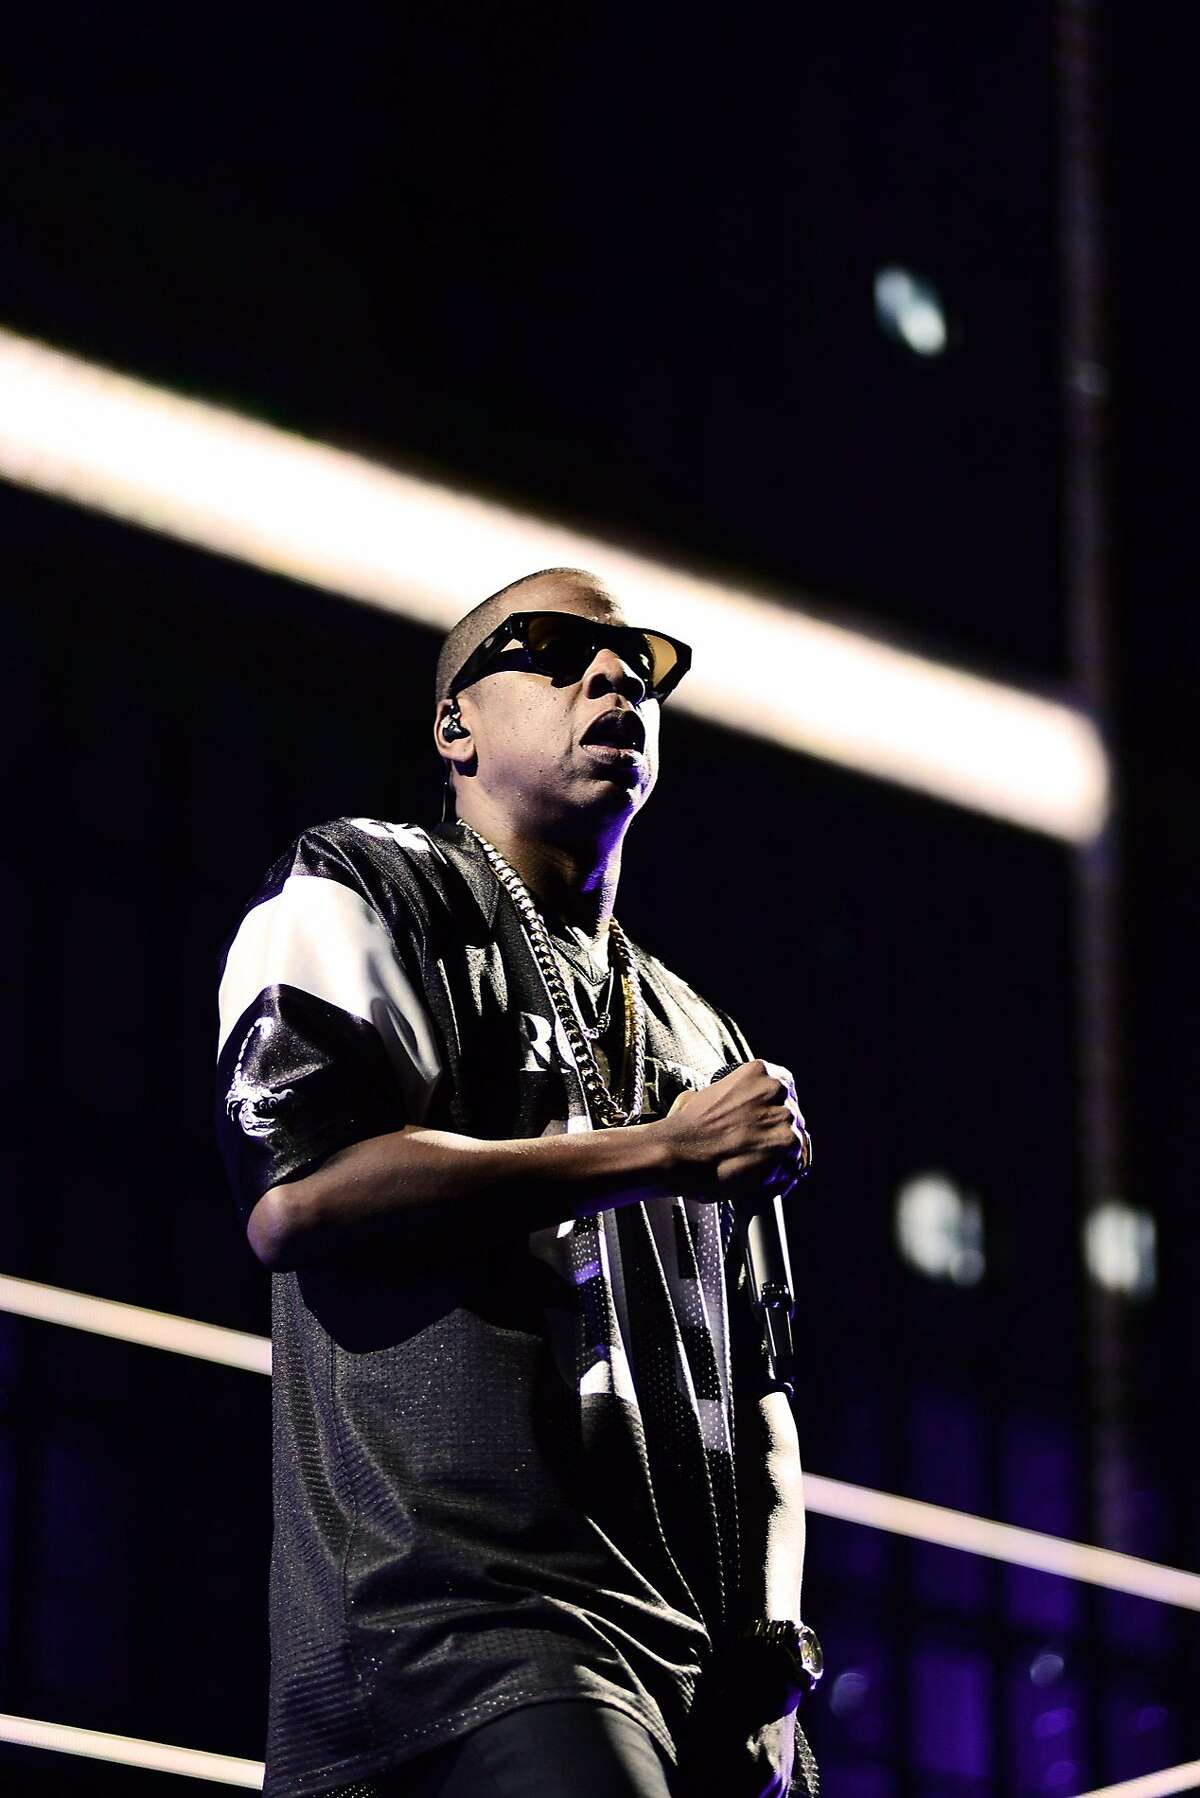 JAY Z performs during the "Beyonce and Jay Z - On the Run" tour at AT&T Park on Tuesday, Aug. 5, 2014, in San Francisco. (Photo by Mason Poole/Invision for Parkwood Entertainment/AP Images)